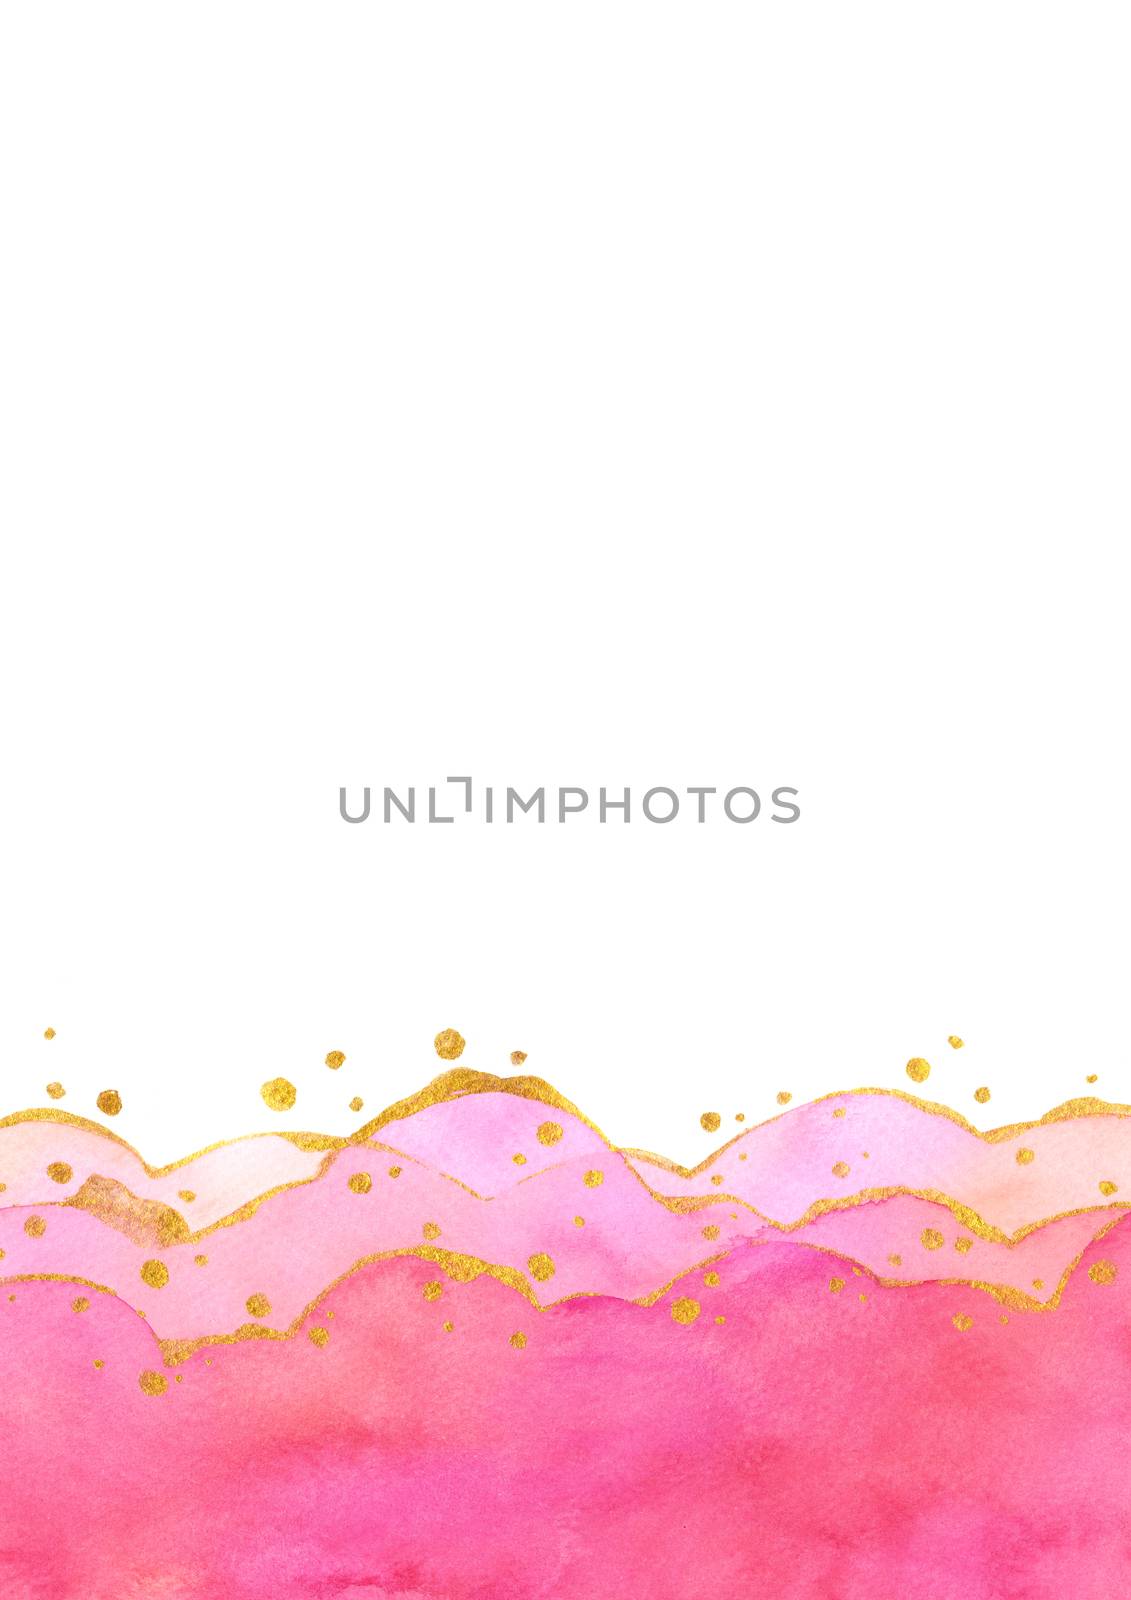 Abstract watercolor hand painting illustration. Bright pink wavy background. High resolution. Design for card, cover, print,web, wedding, valentine.